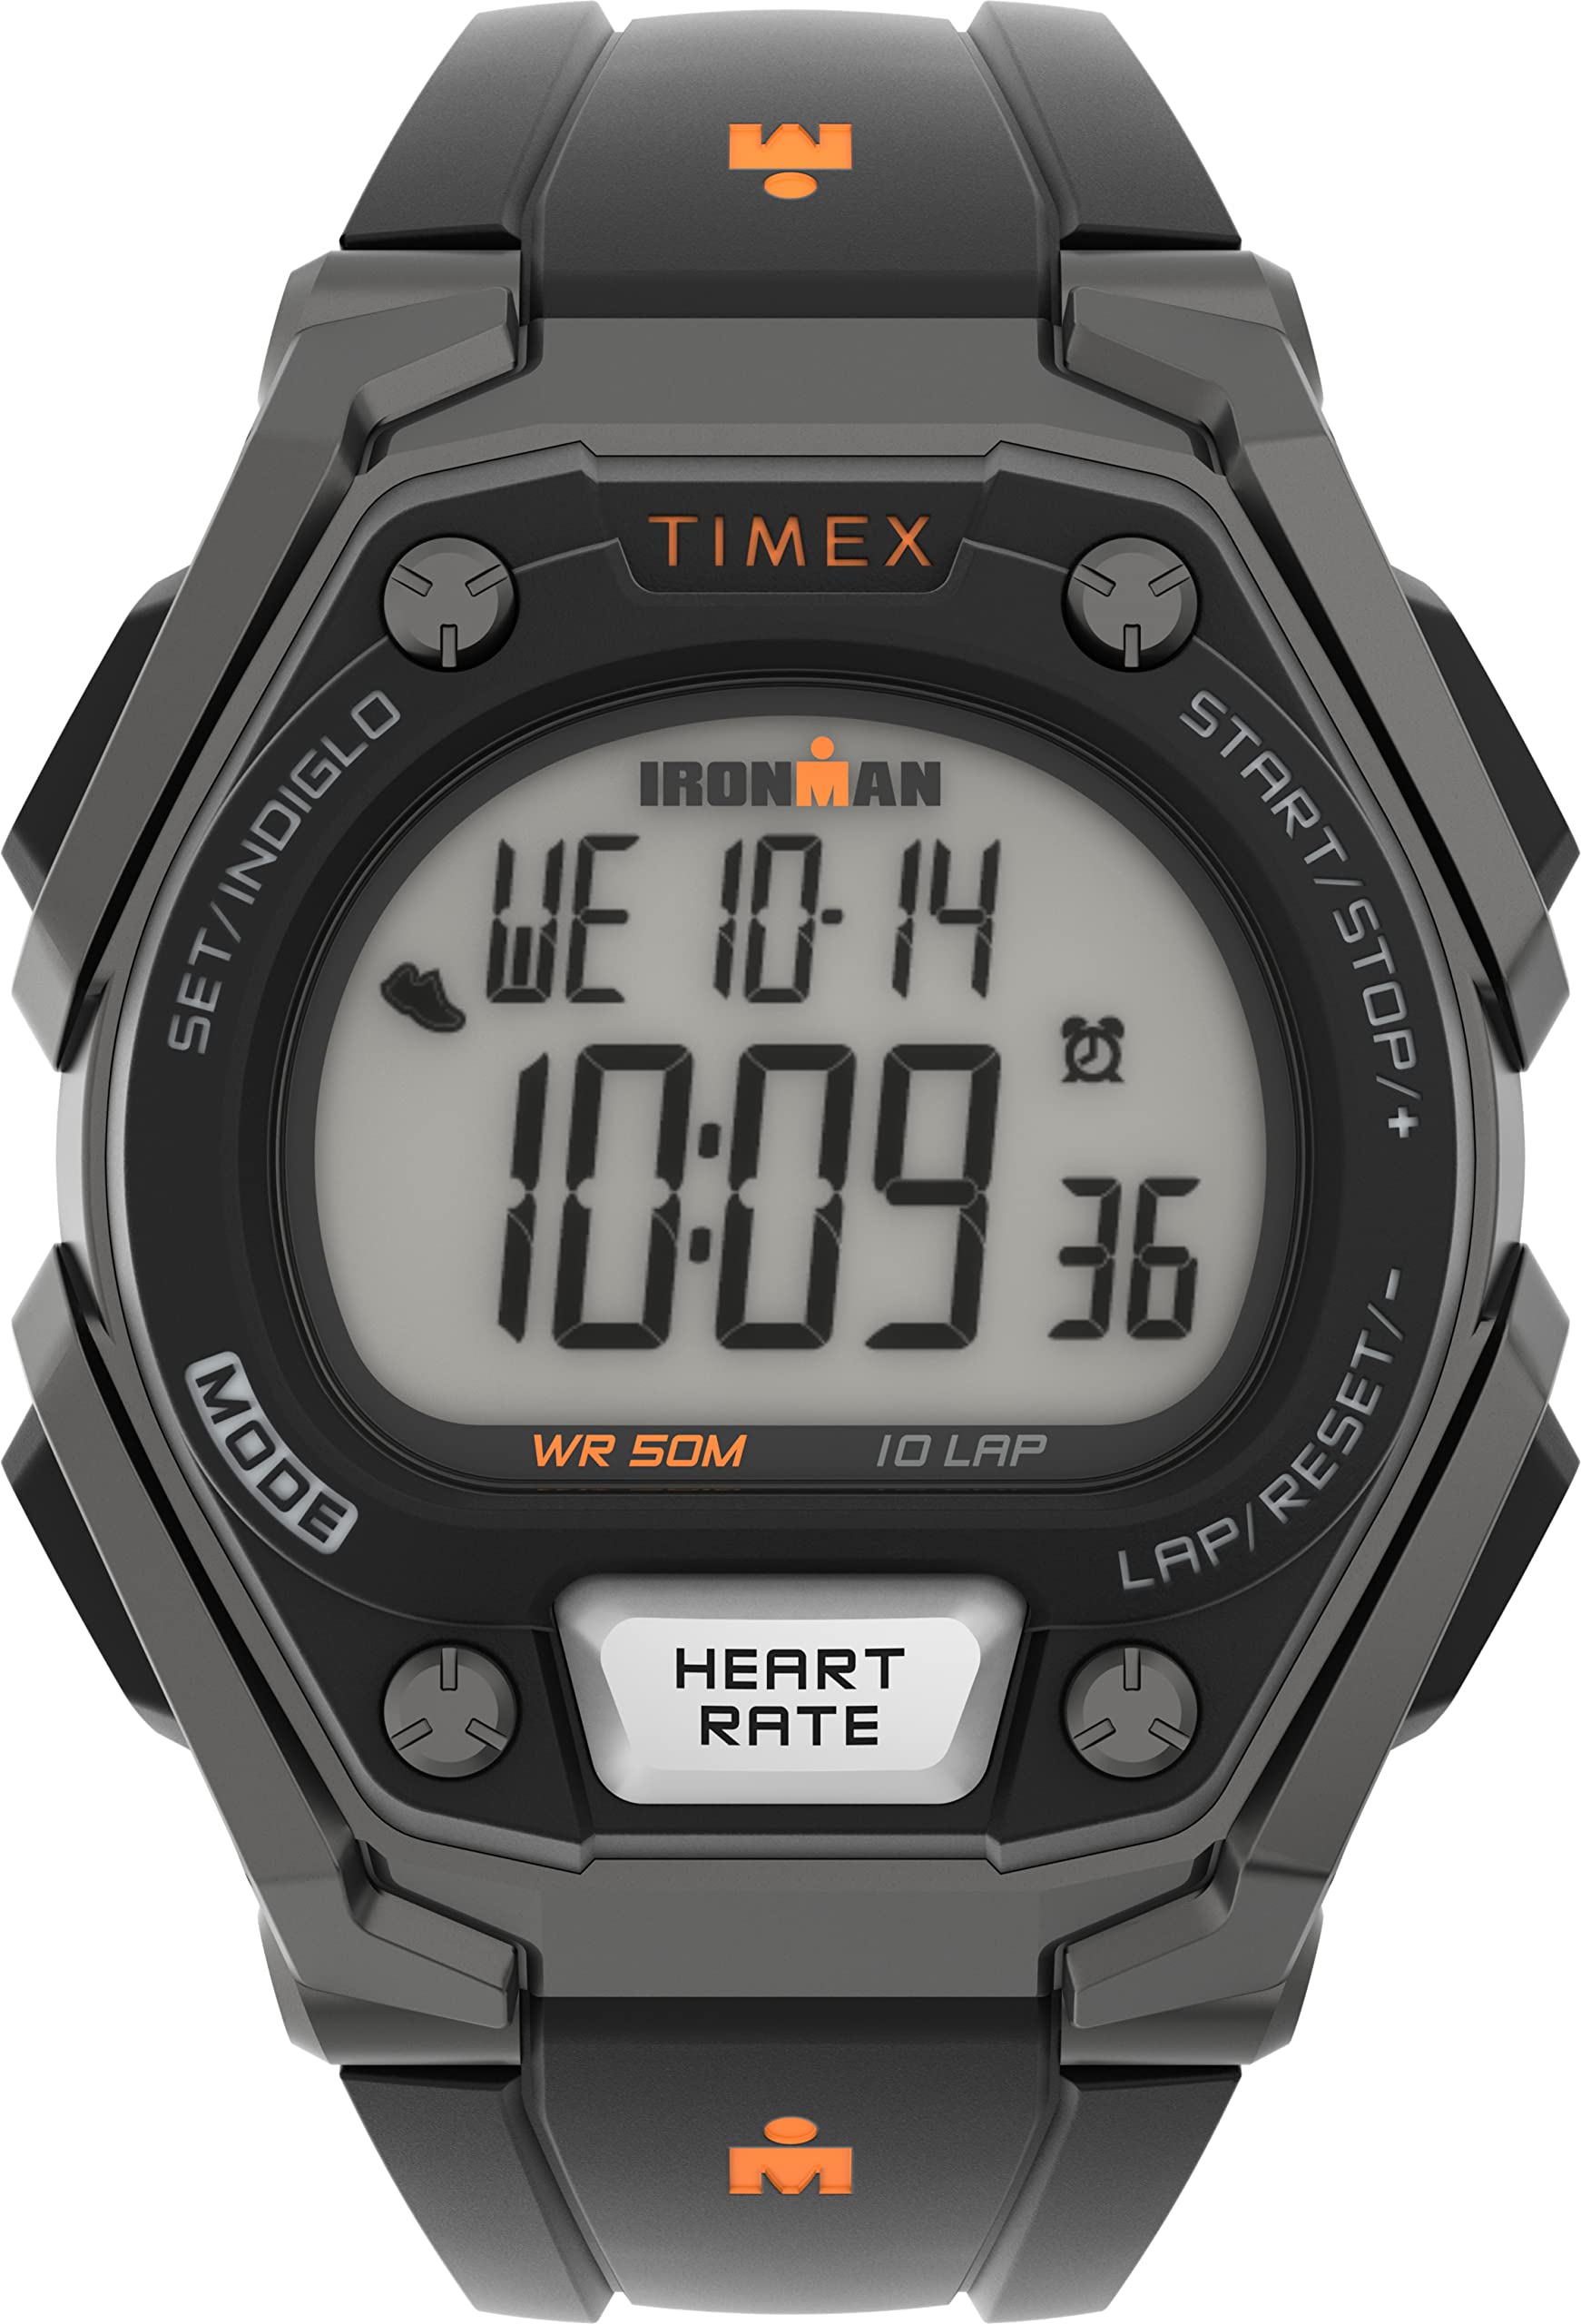 Timex Men's Ironman Classic 43mm Watch - Black Strap with Orange Accents